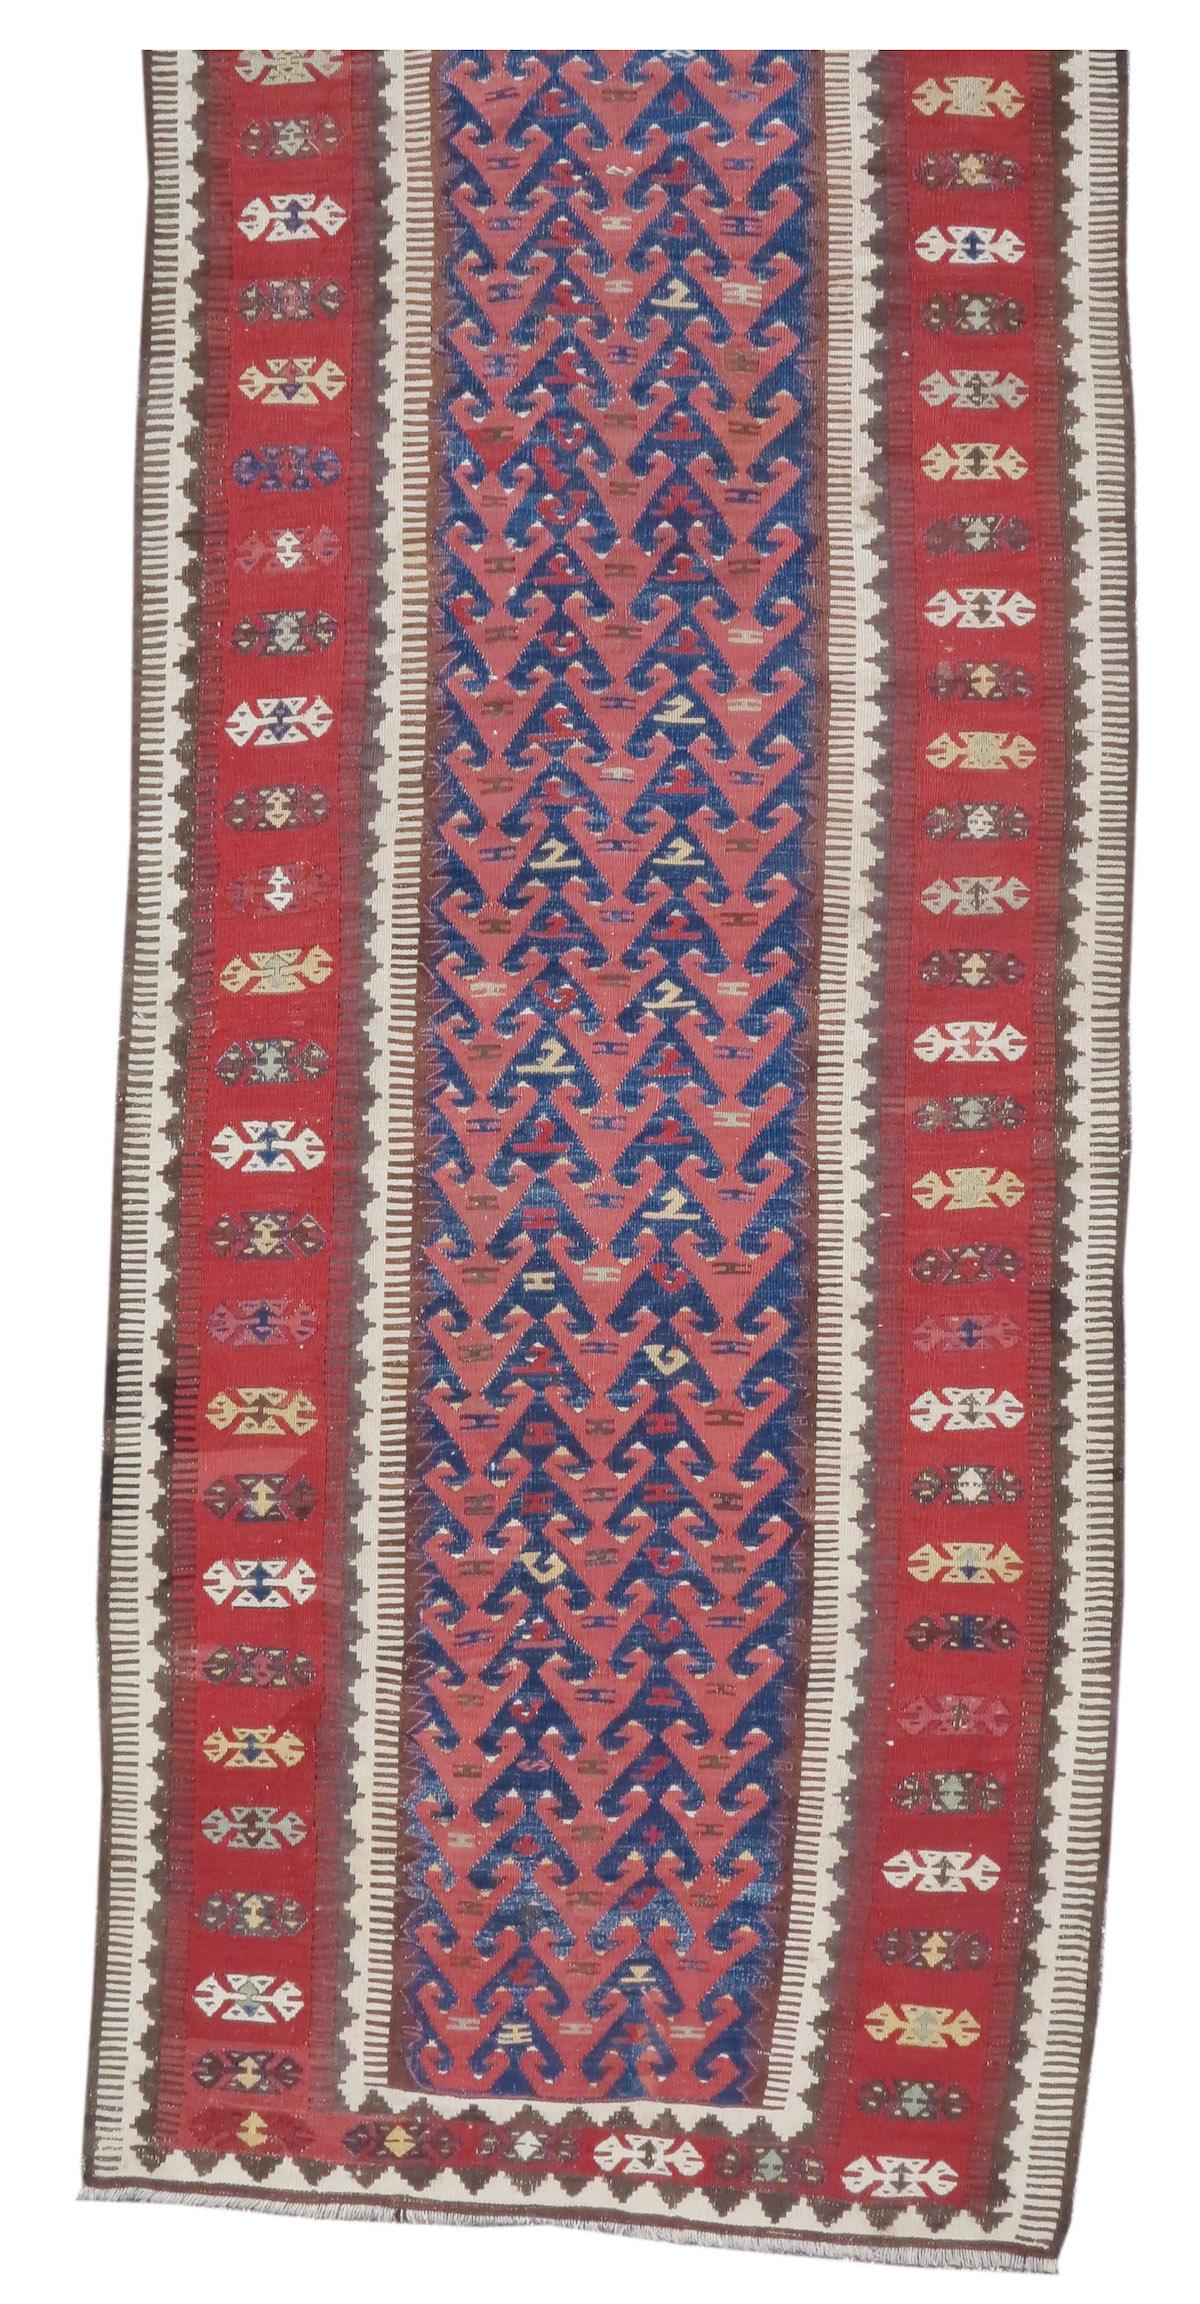 Antique Anatolian Kilim Runner Rug, 19th Century

The structure of various flat-weaves is said to determine an array of ornament and shapes that make up the vocabulary of Oriental rugs. This Turkish kilim woven in the slit-tapestry technique draws